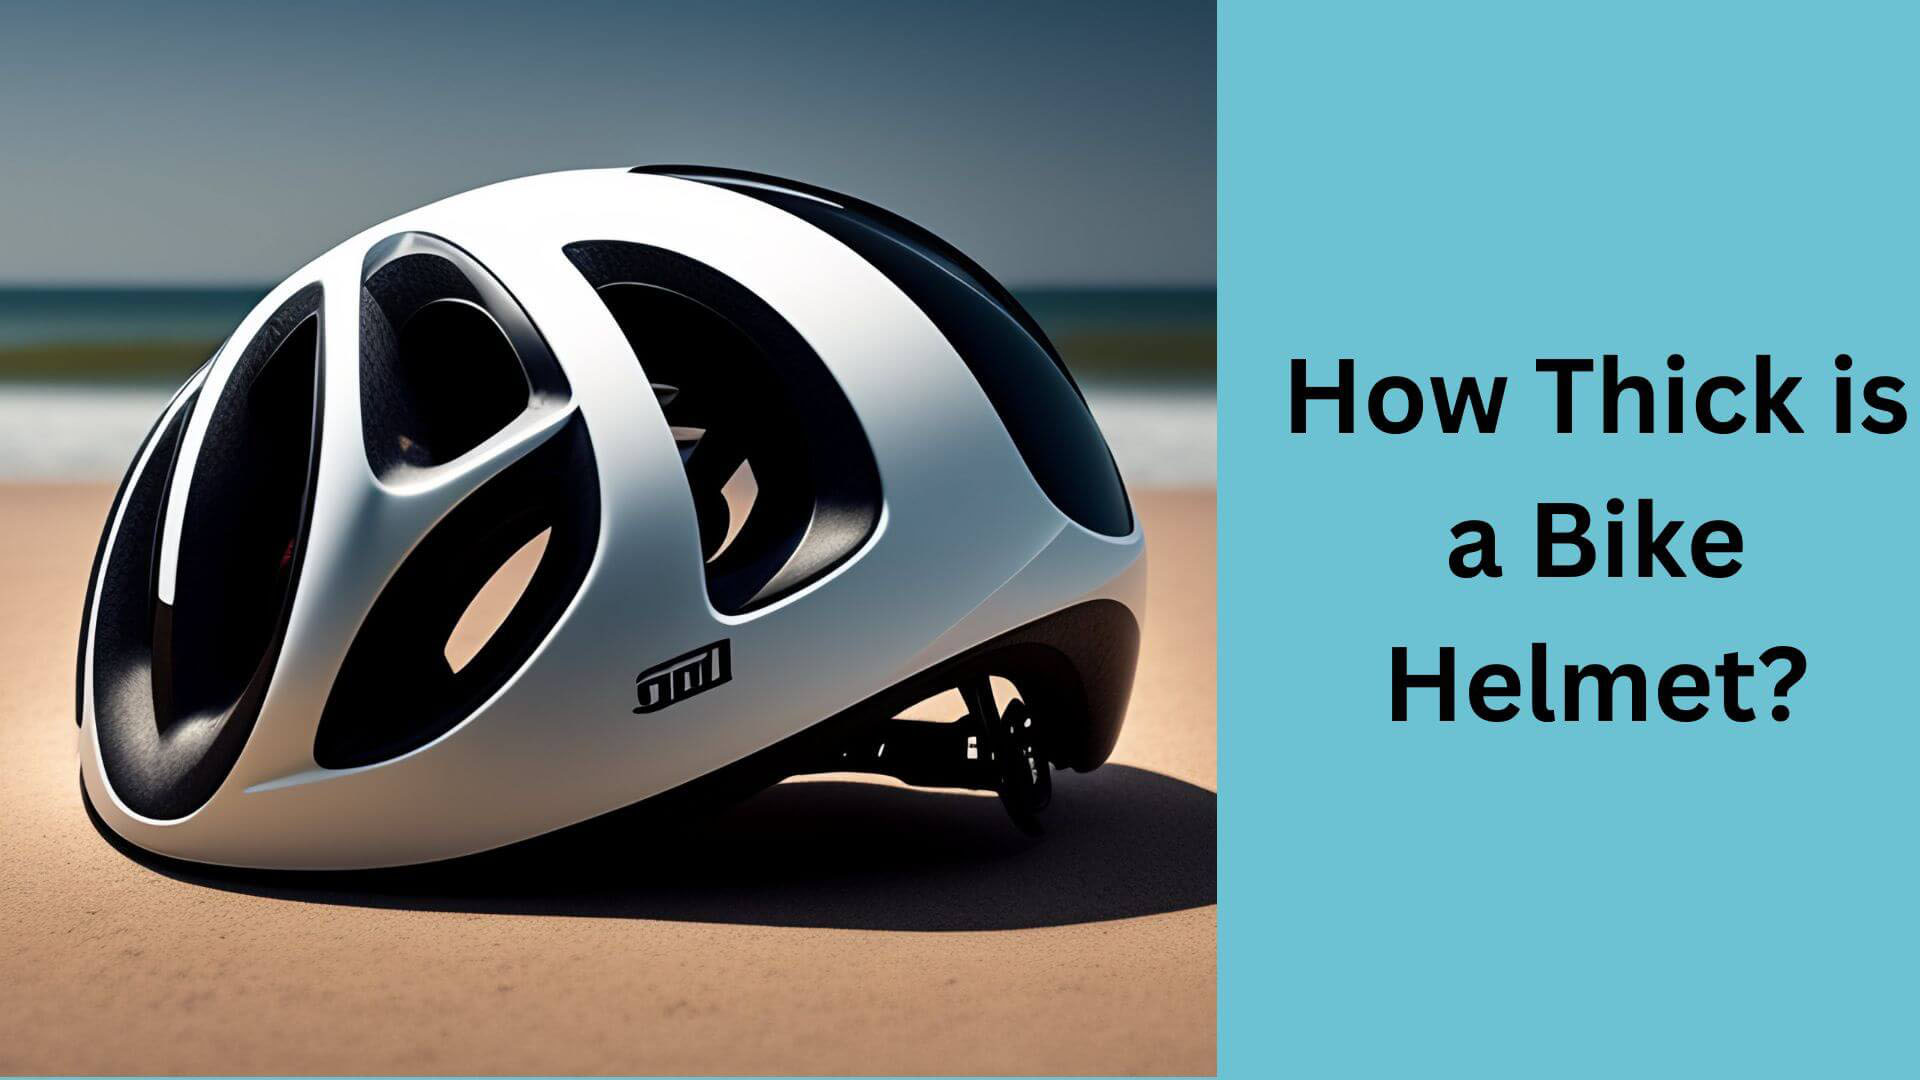 How Thick is a Bike Helmet?